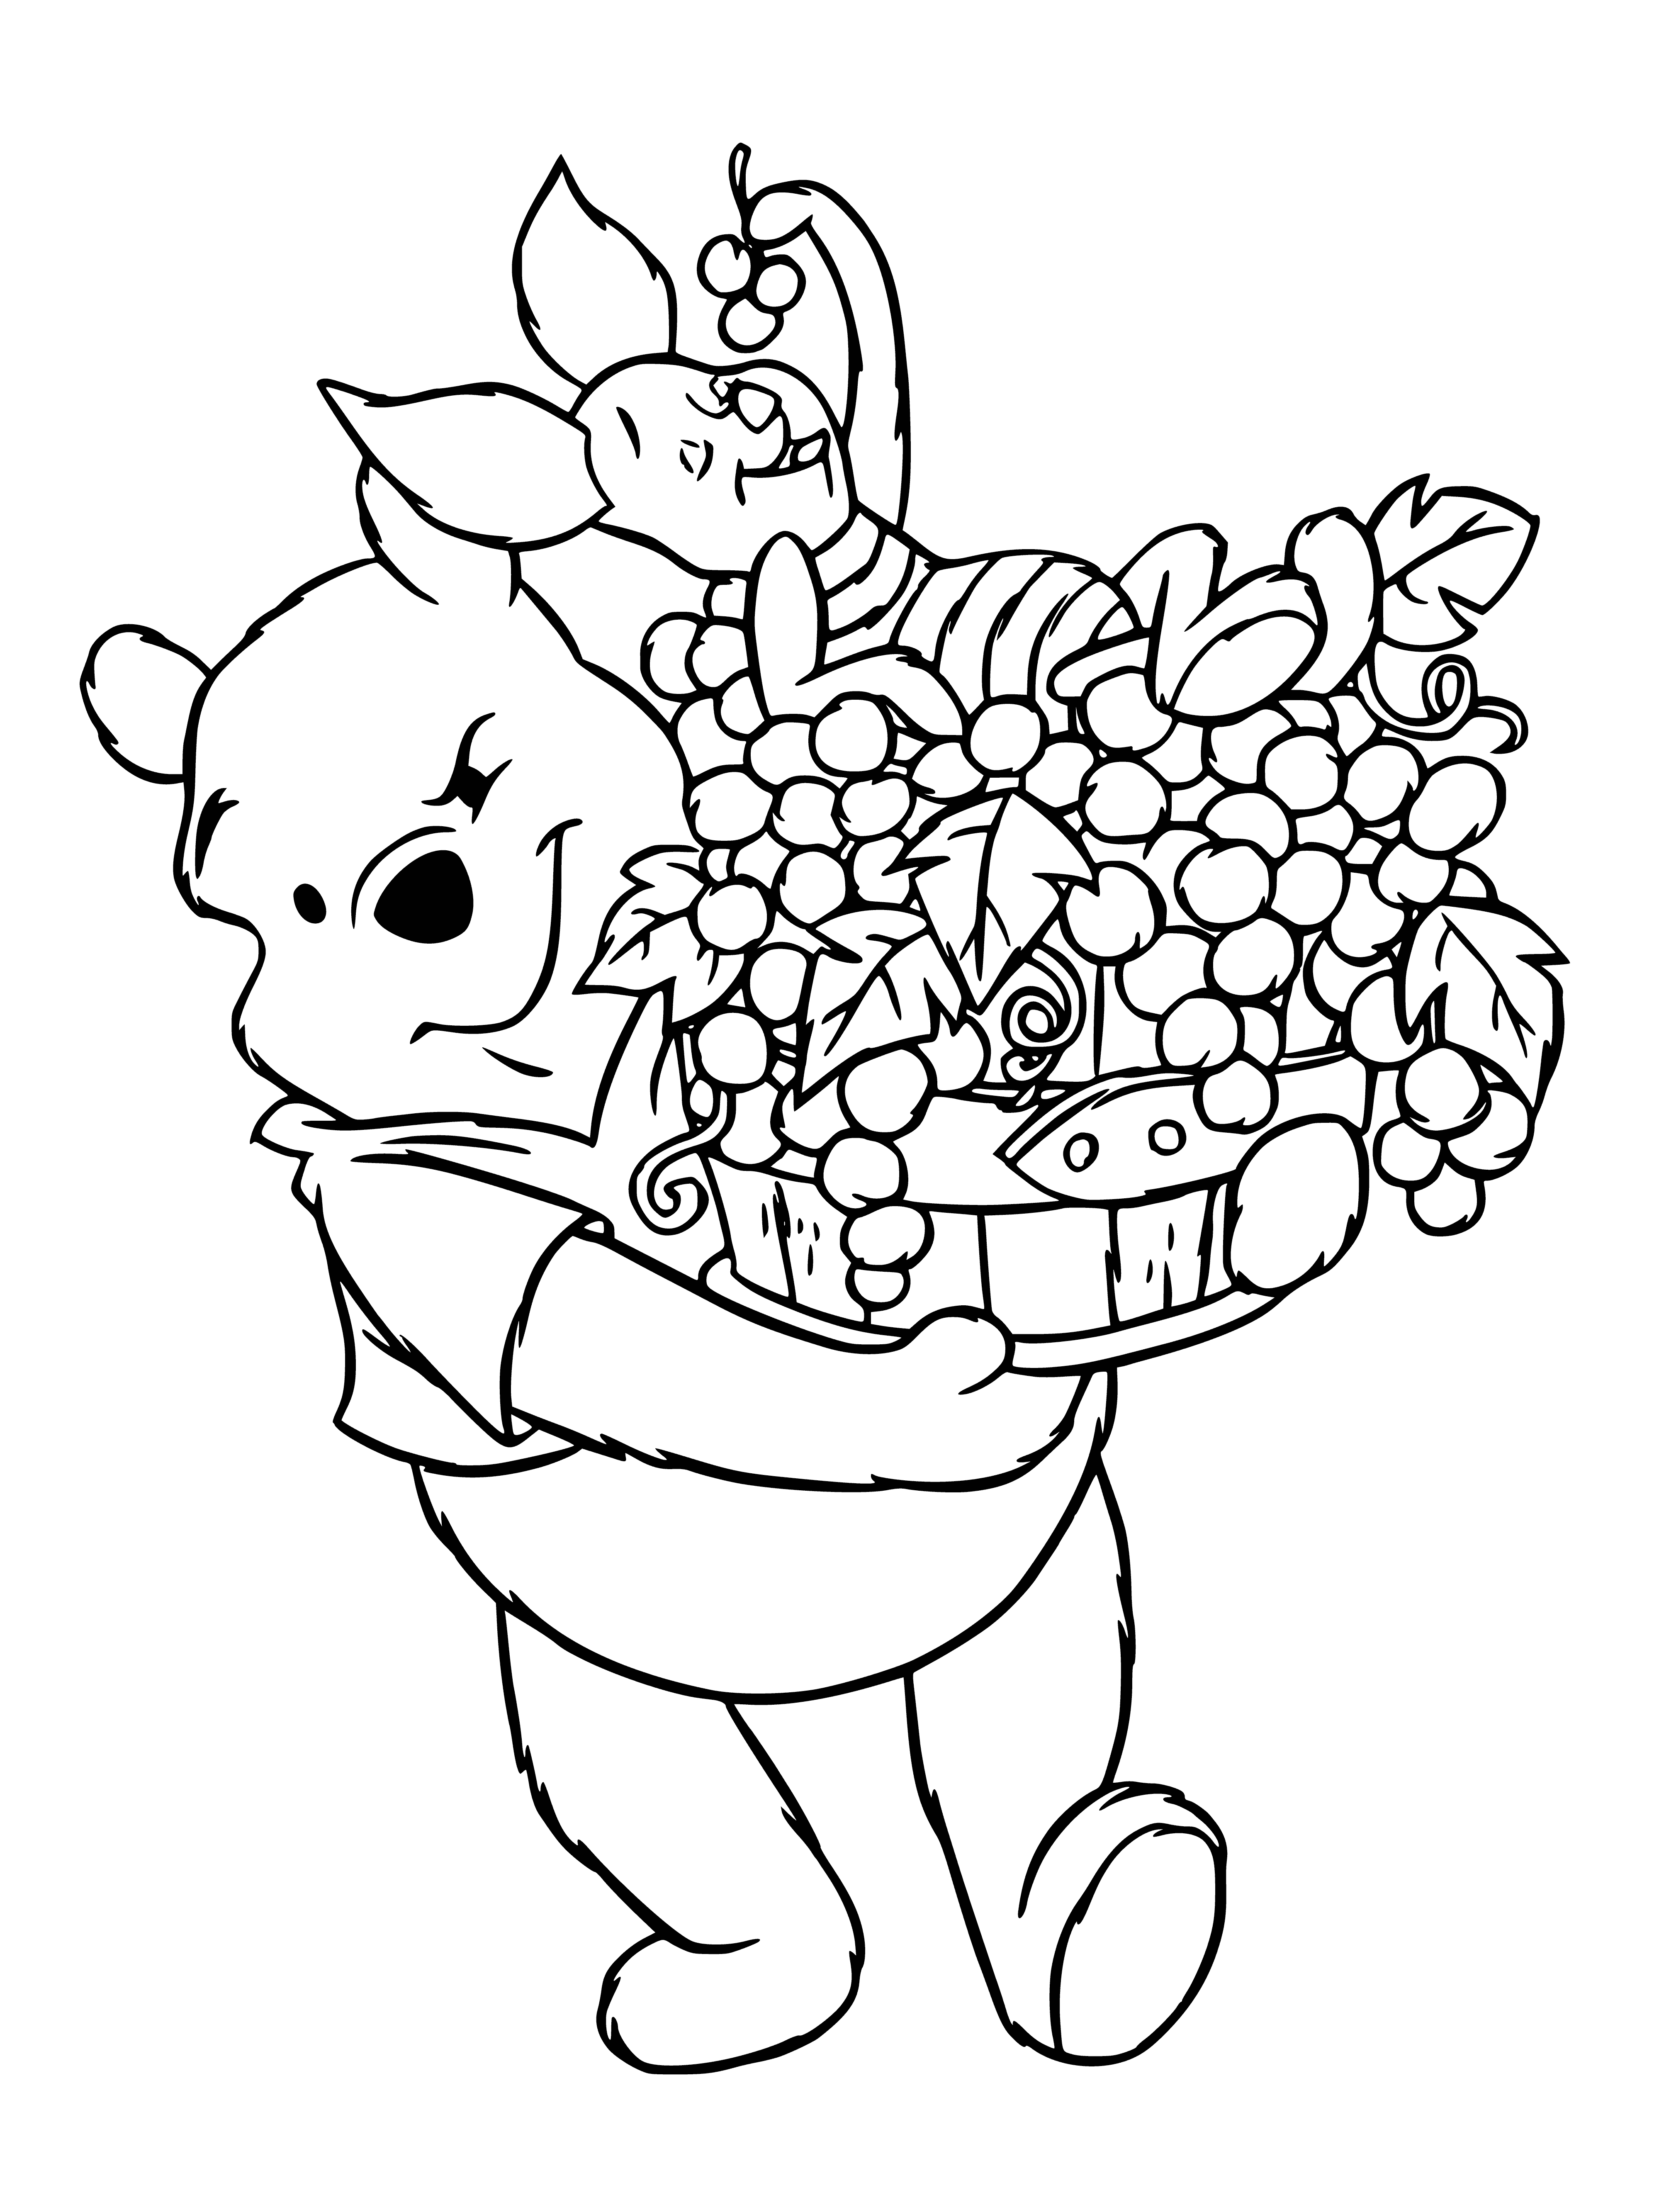 coloring page: Bear & pig hug on a green hill w/ blue sky & white clouds, pig wearing a pink ribbon. #cuteanimals